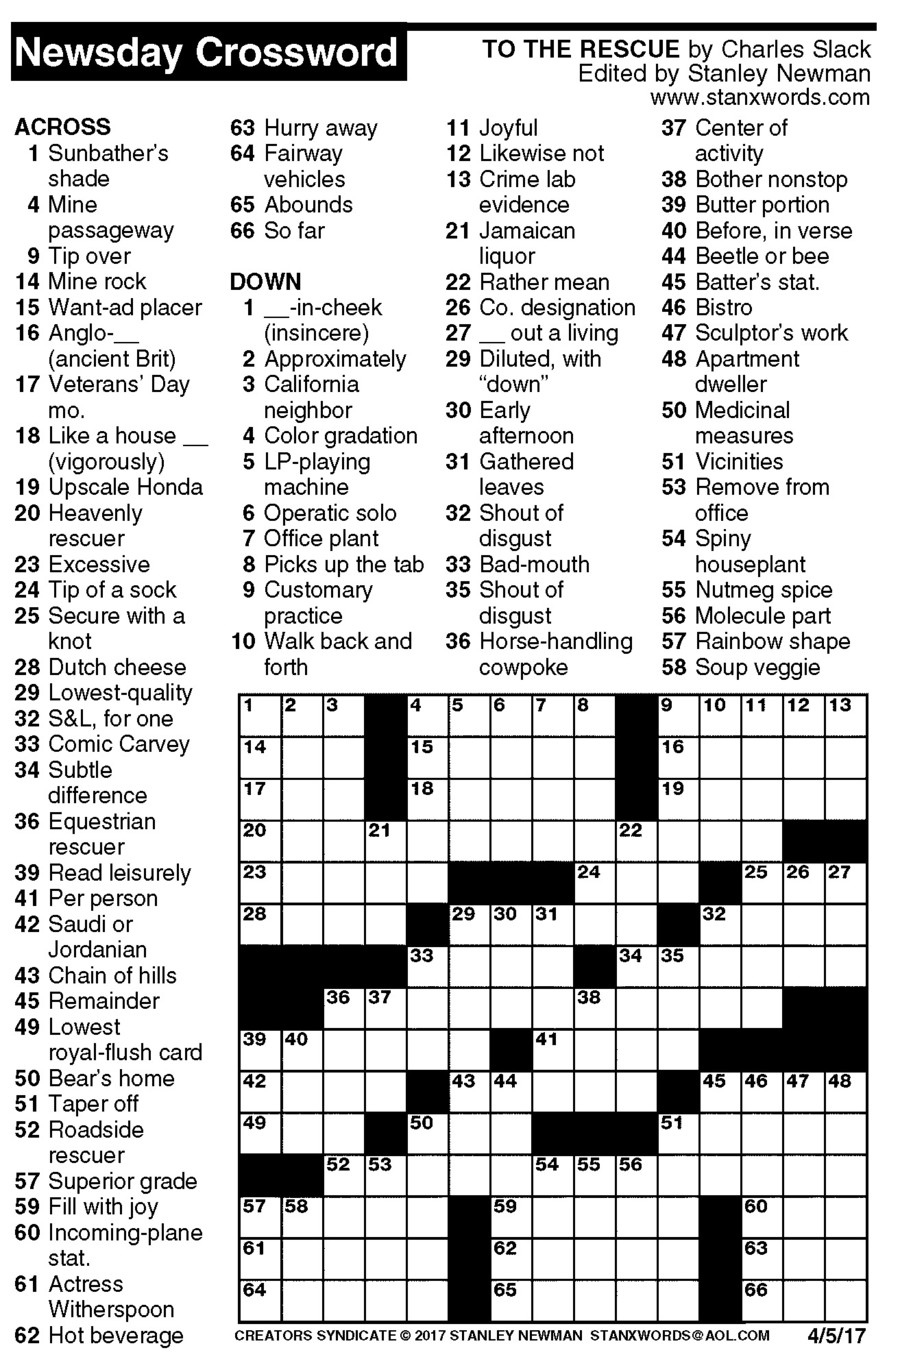 Newsday Crossword Puzzle For Apr 05 2017 By Stanley Newman Creators 